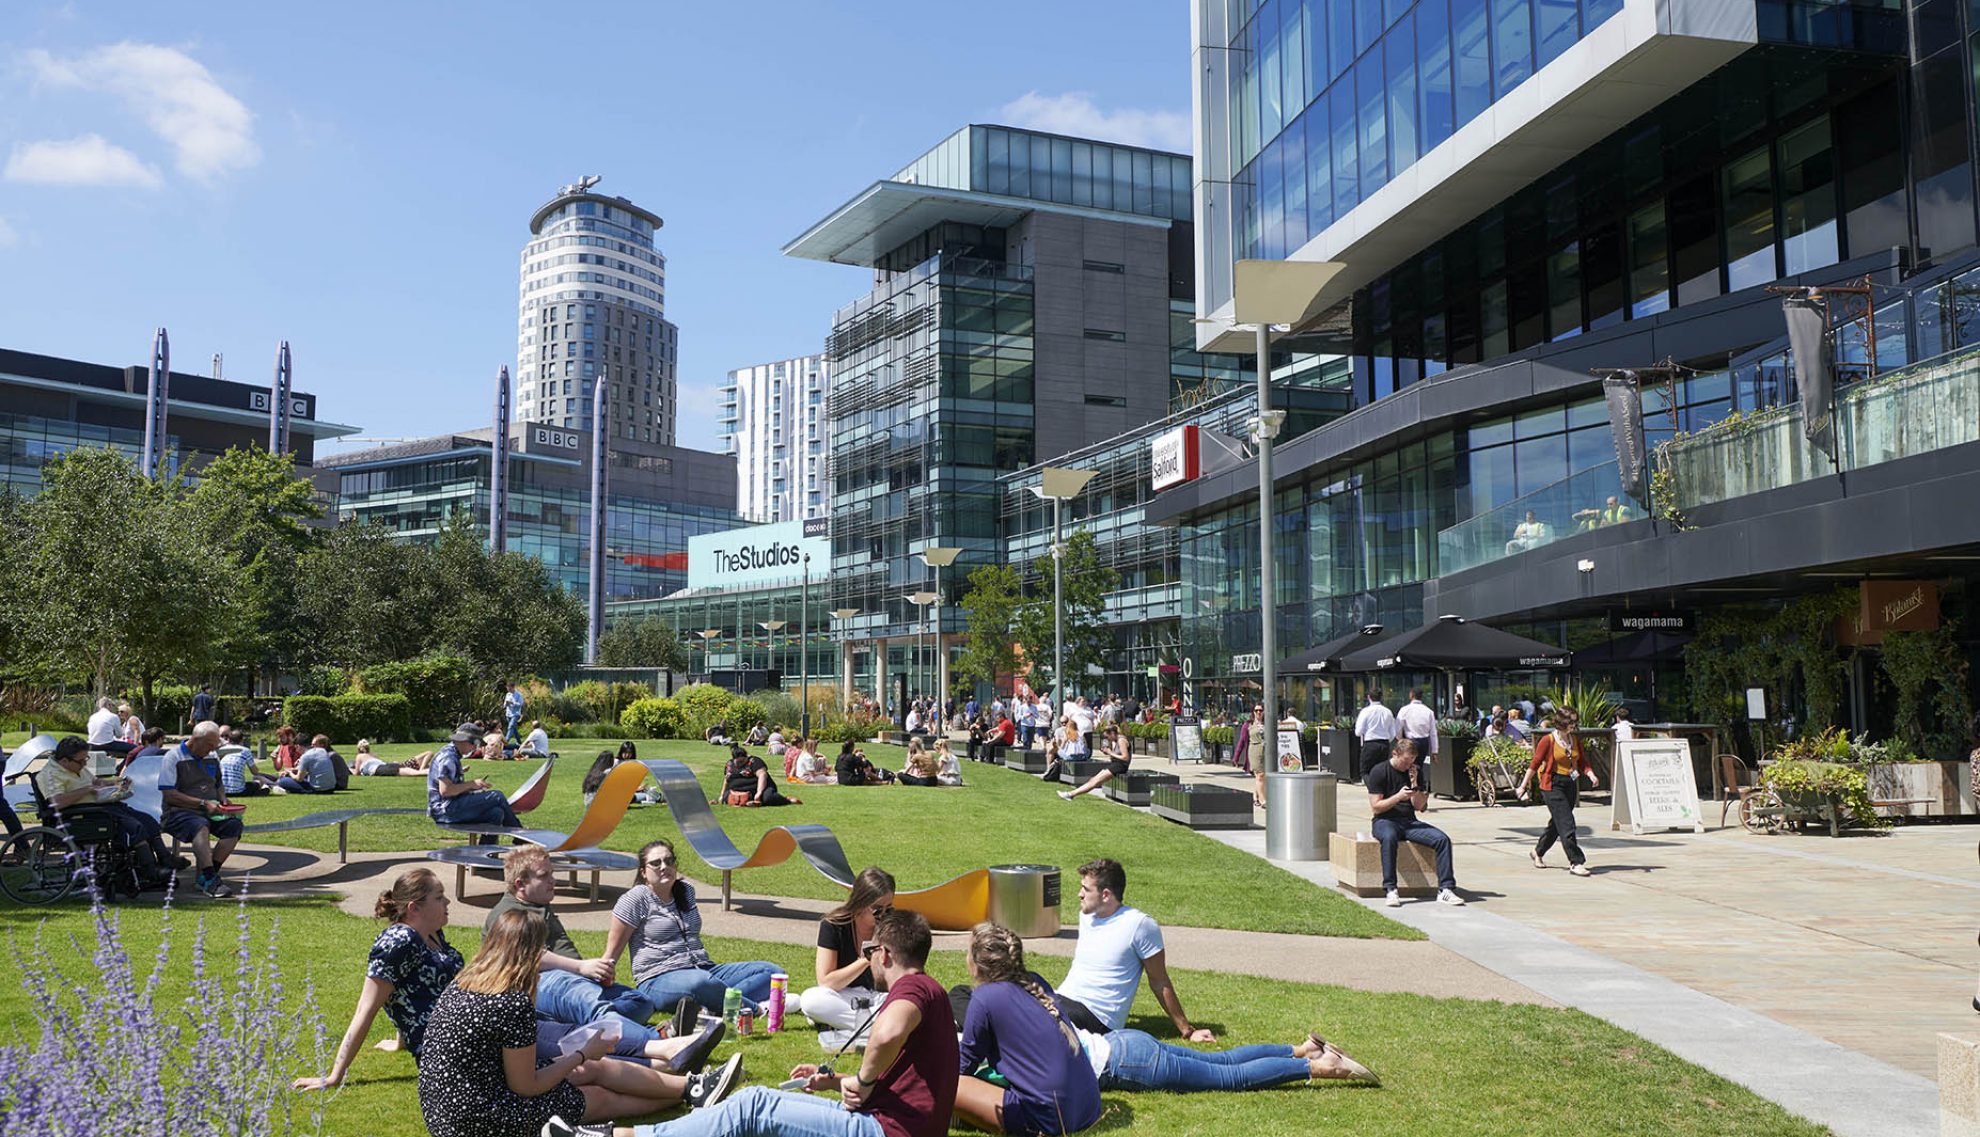 People sitting on the grass in MediaCity, Salford Quays